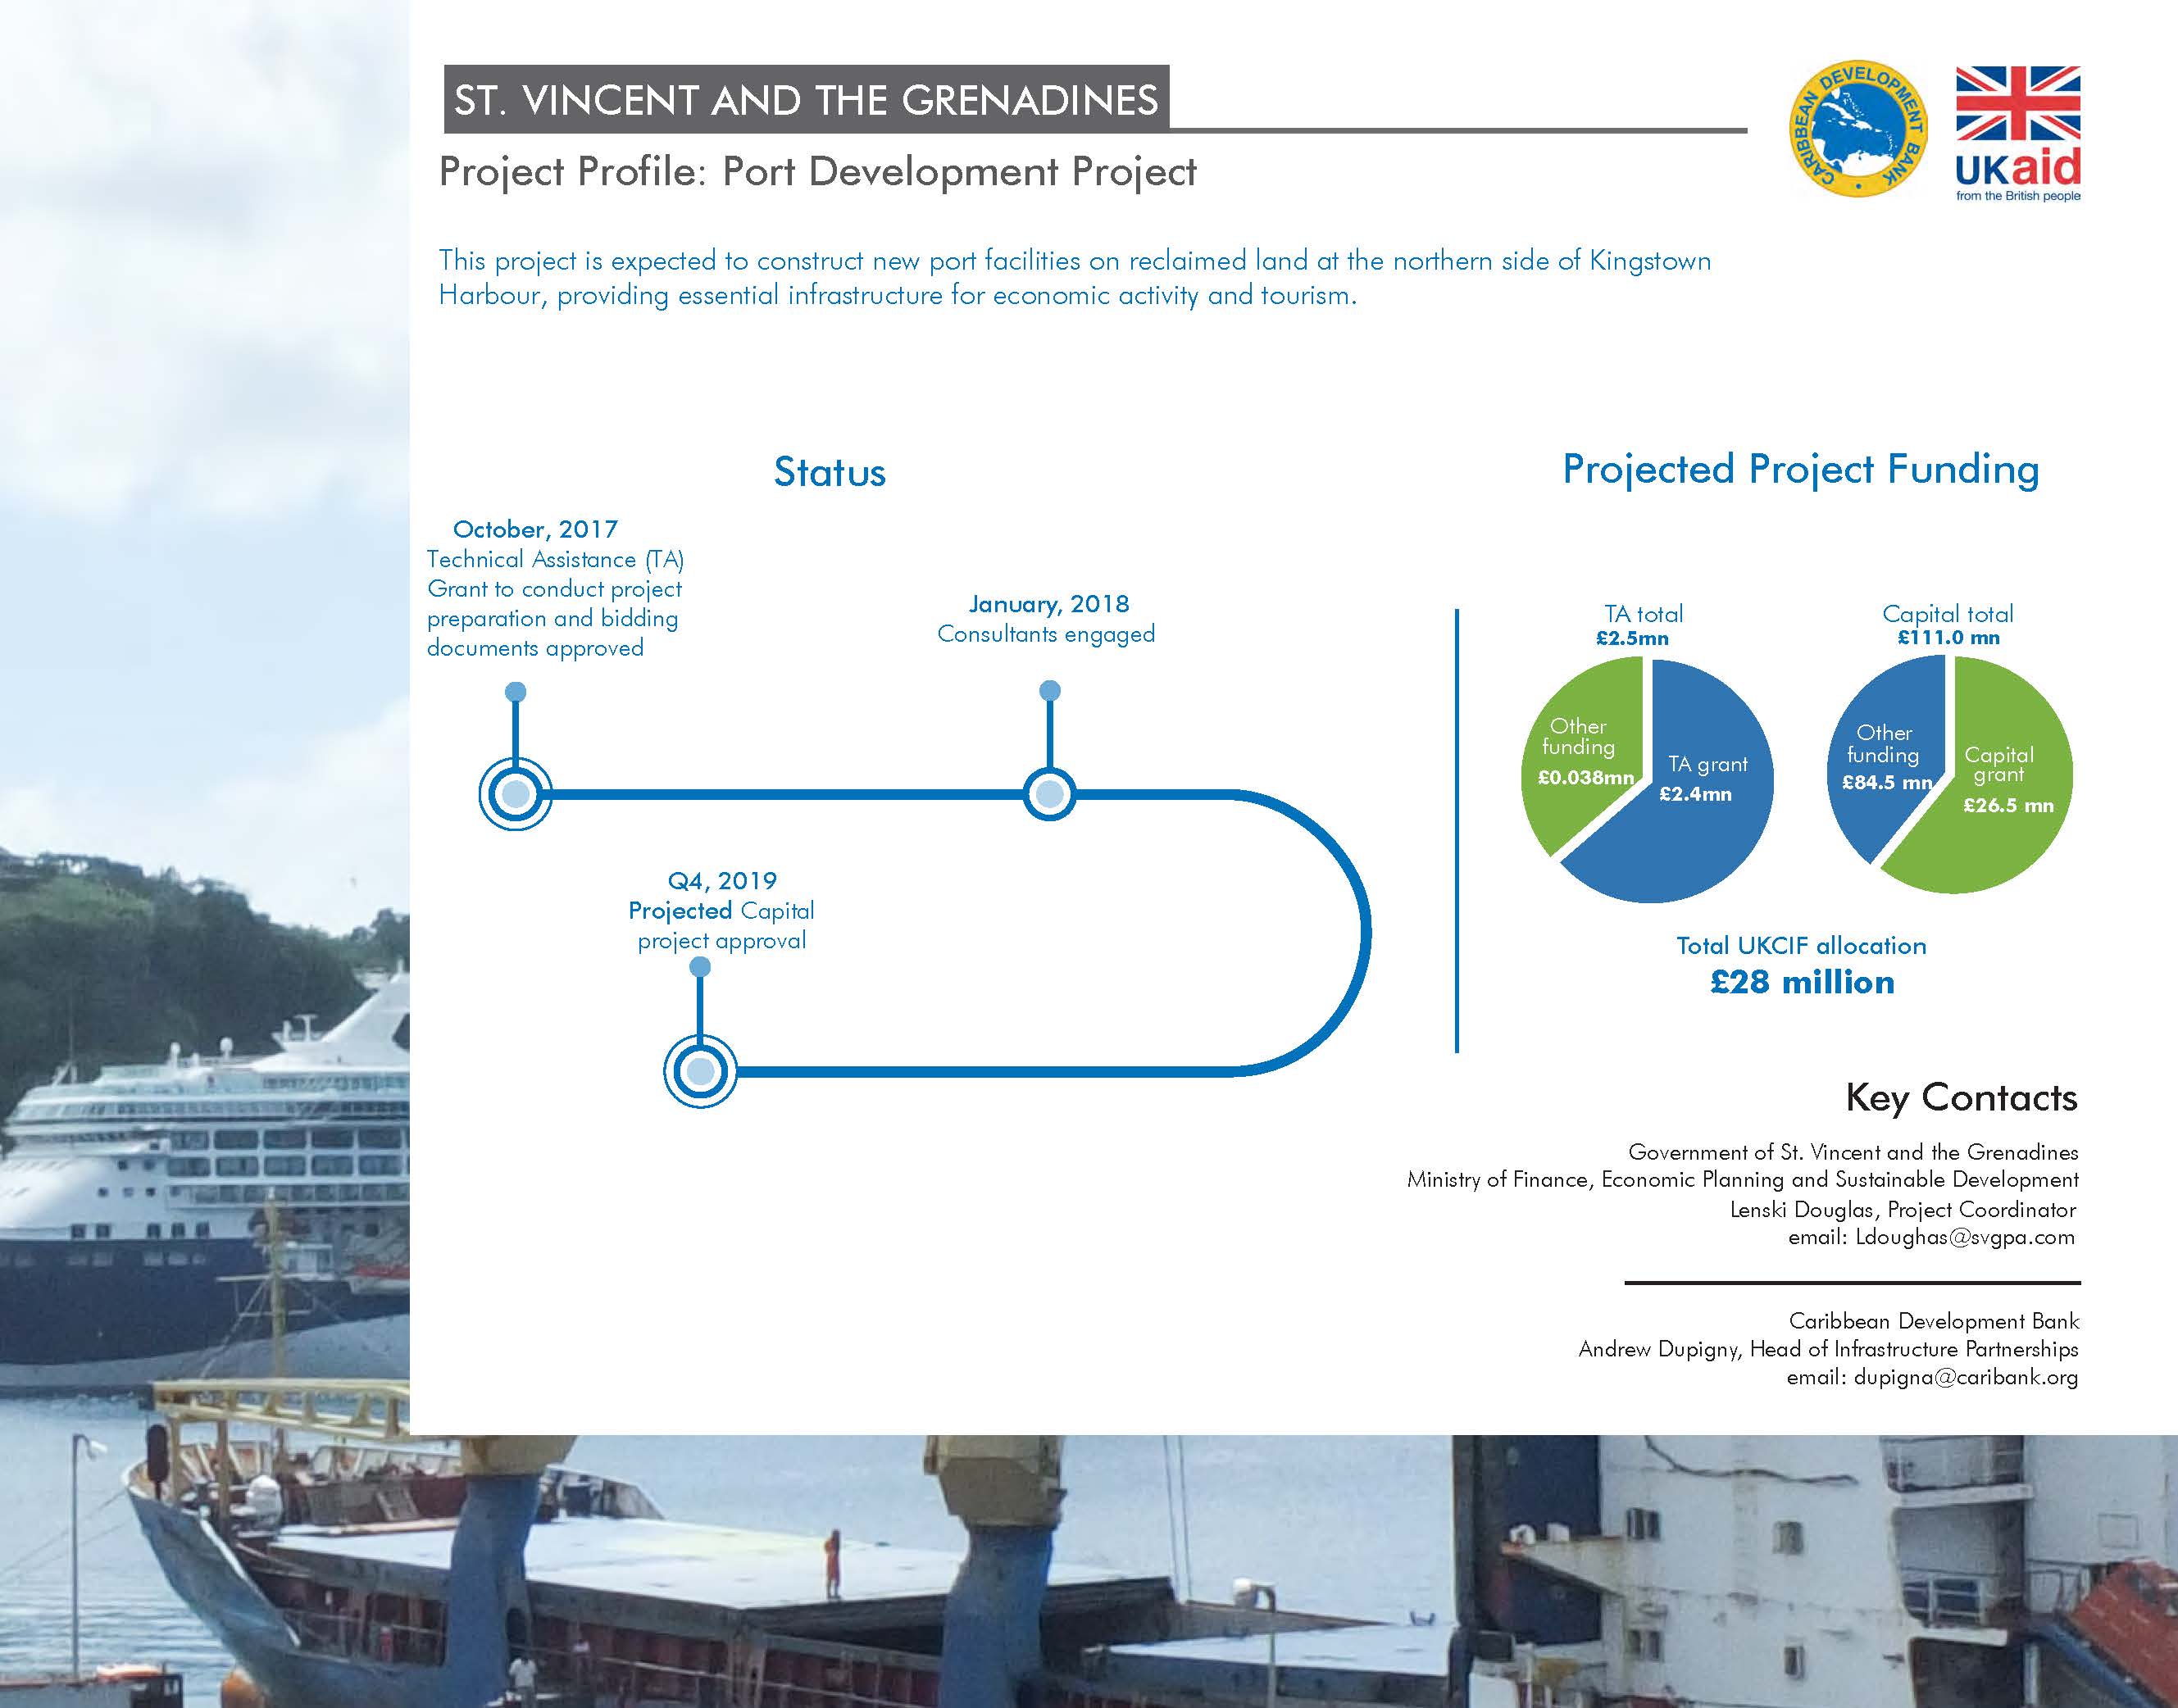 project profile with background image of ships in port with text and charts against white backdrop